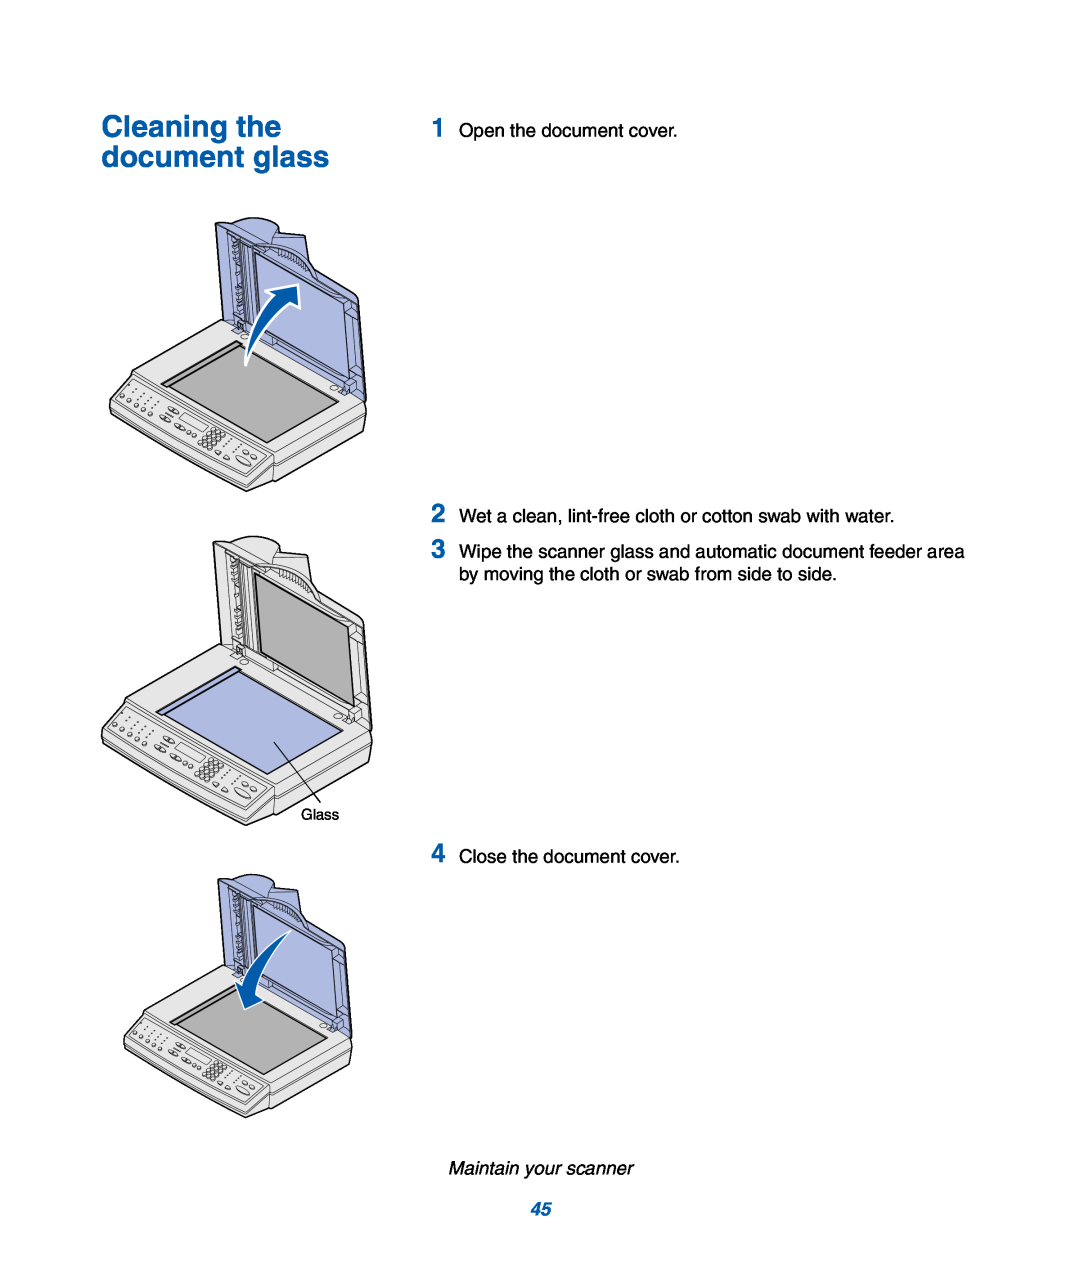 IBM M22 MFP manual Cleaning the, document glass, Open the document cover, Maintain your scanner 